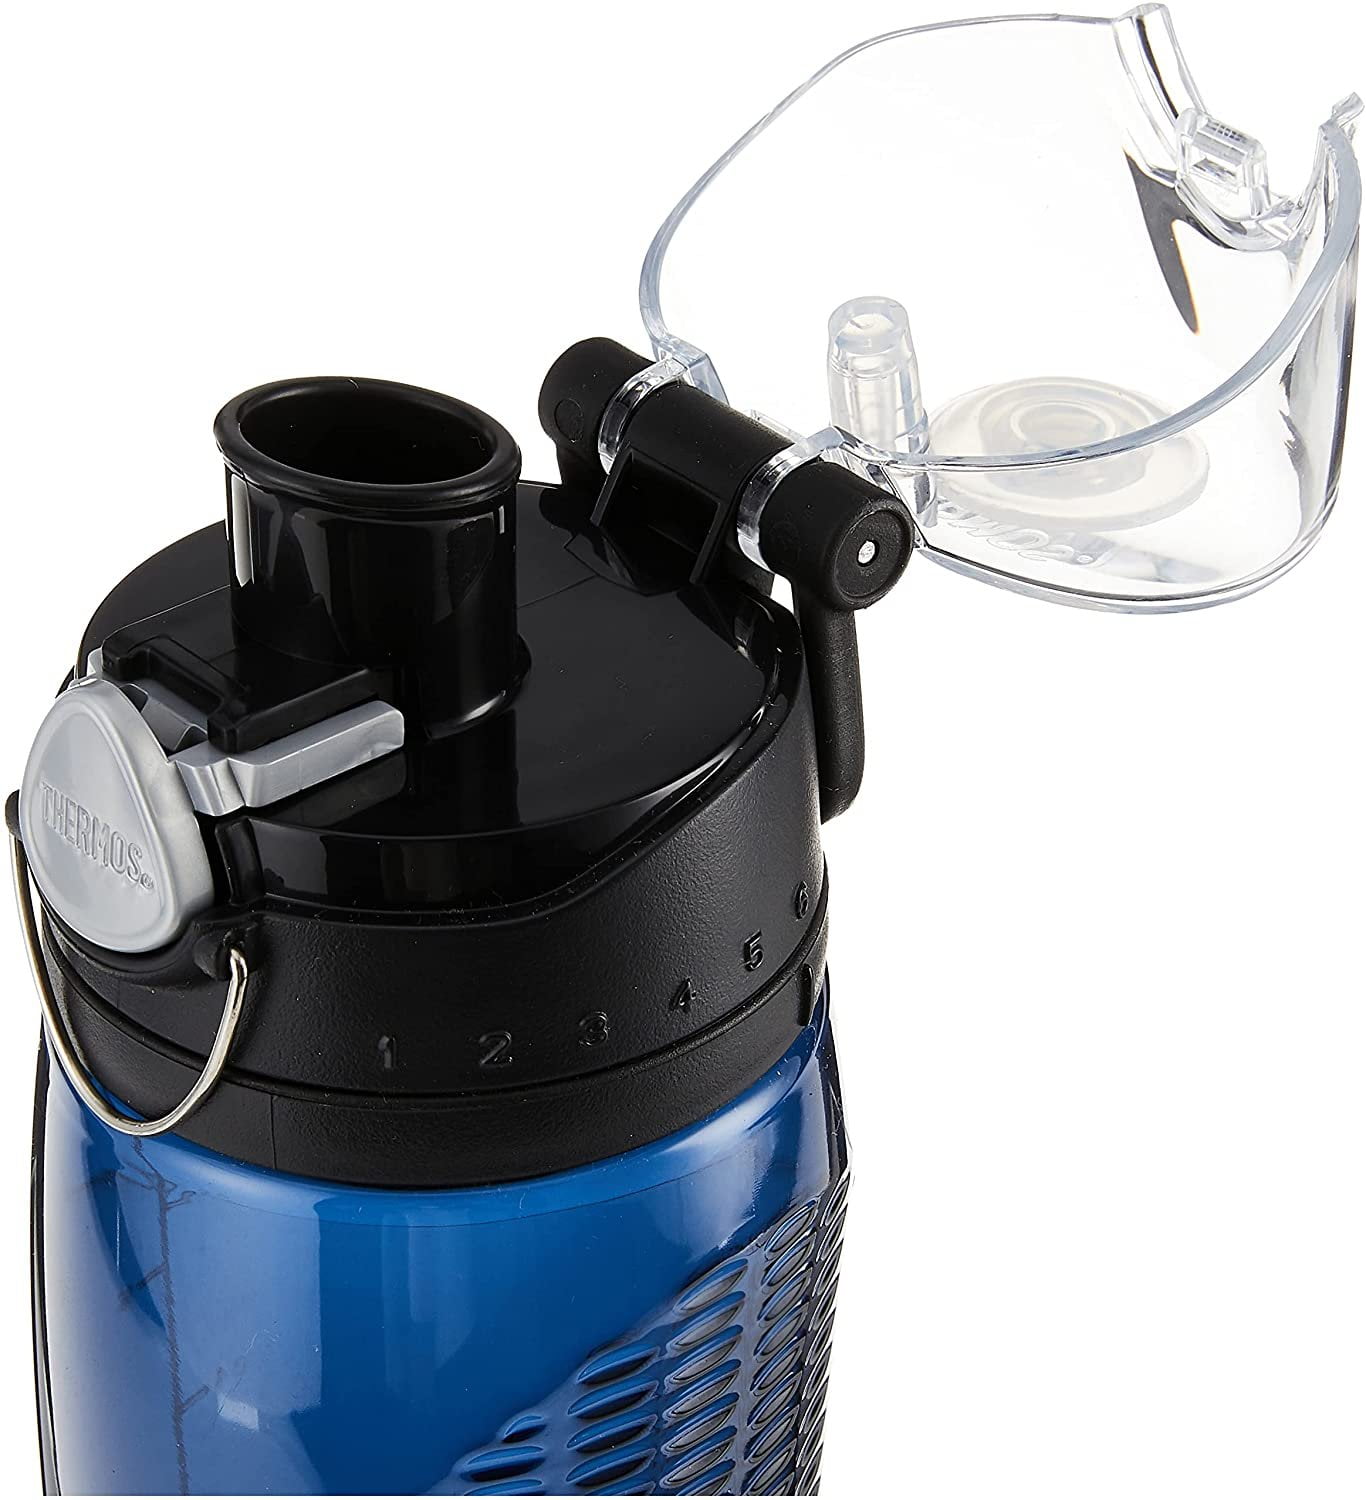 Thermos Hydration Bottle Assortment